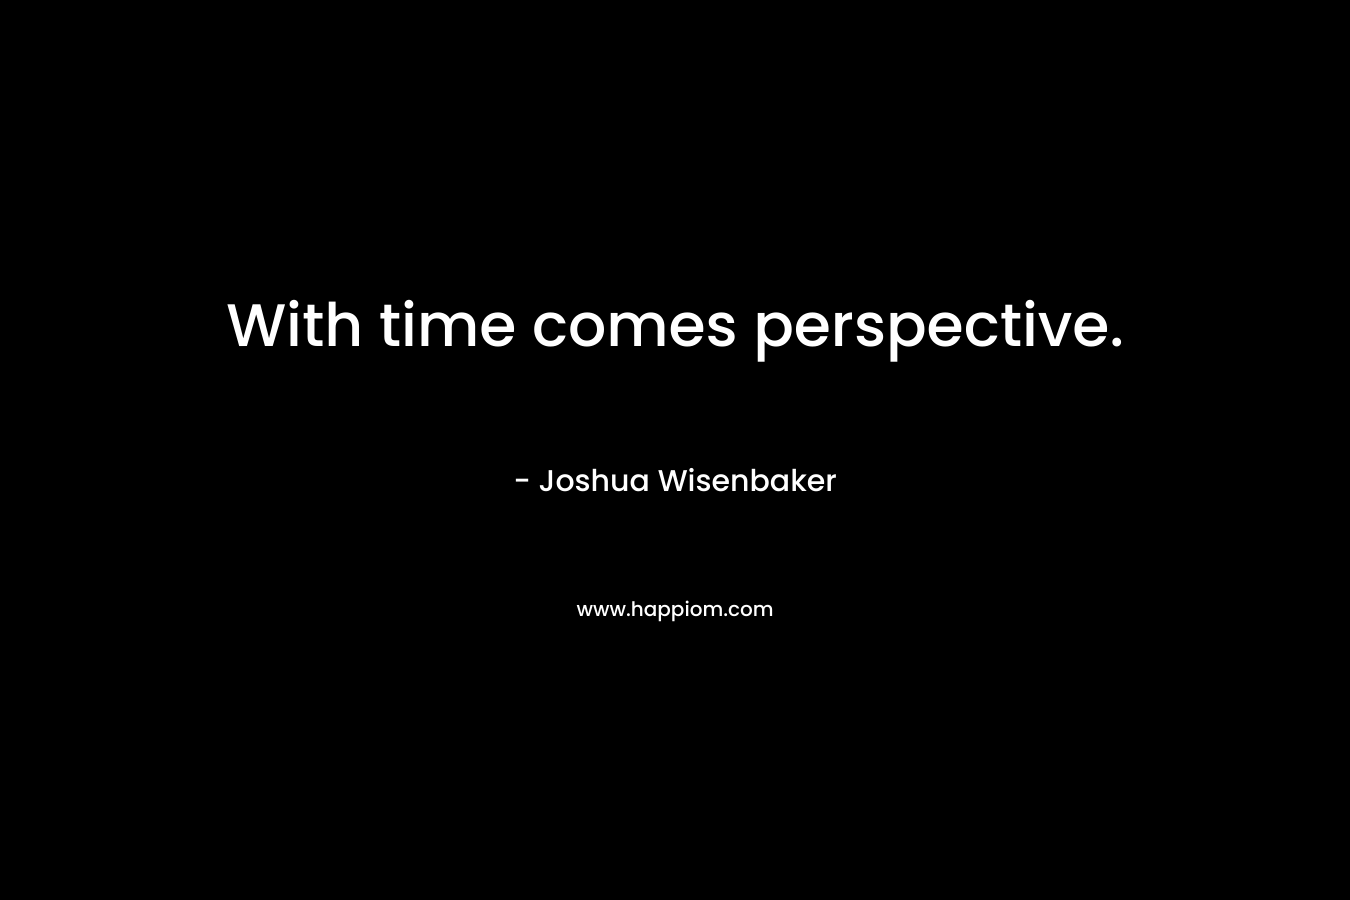 With time comes perspective.